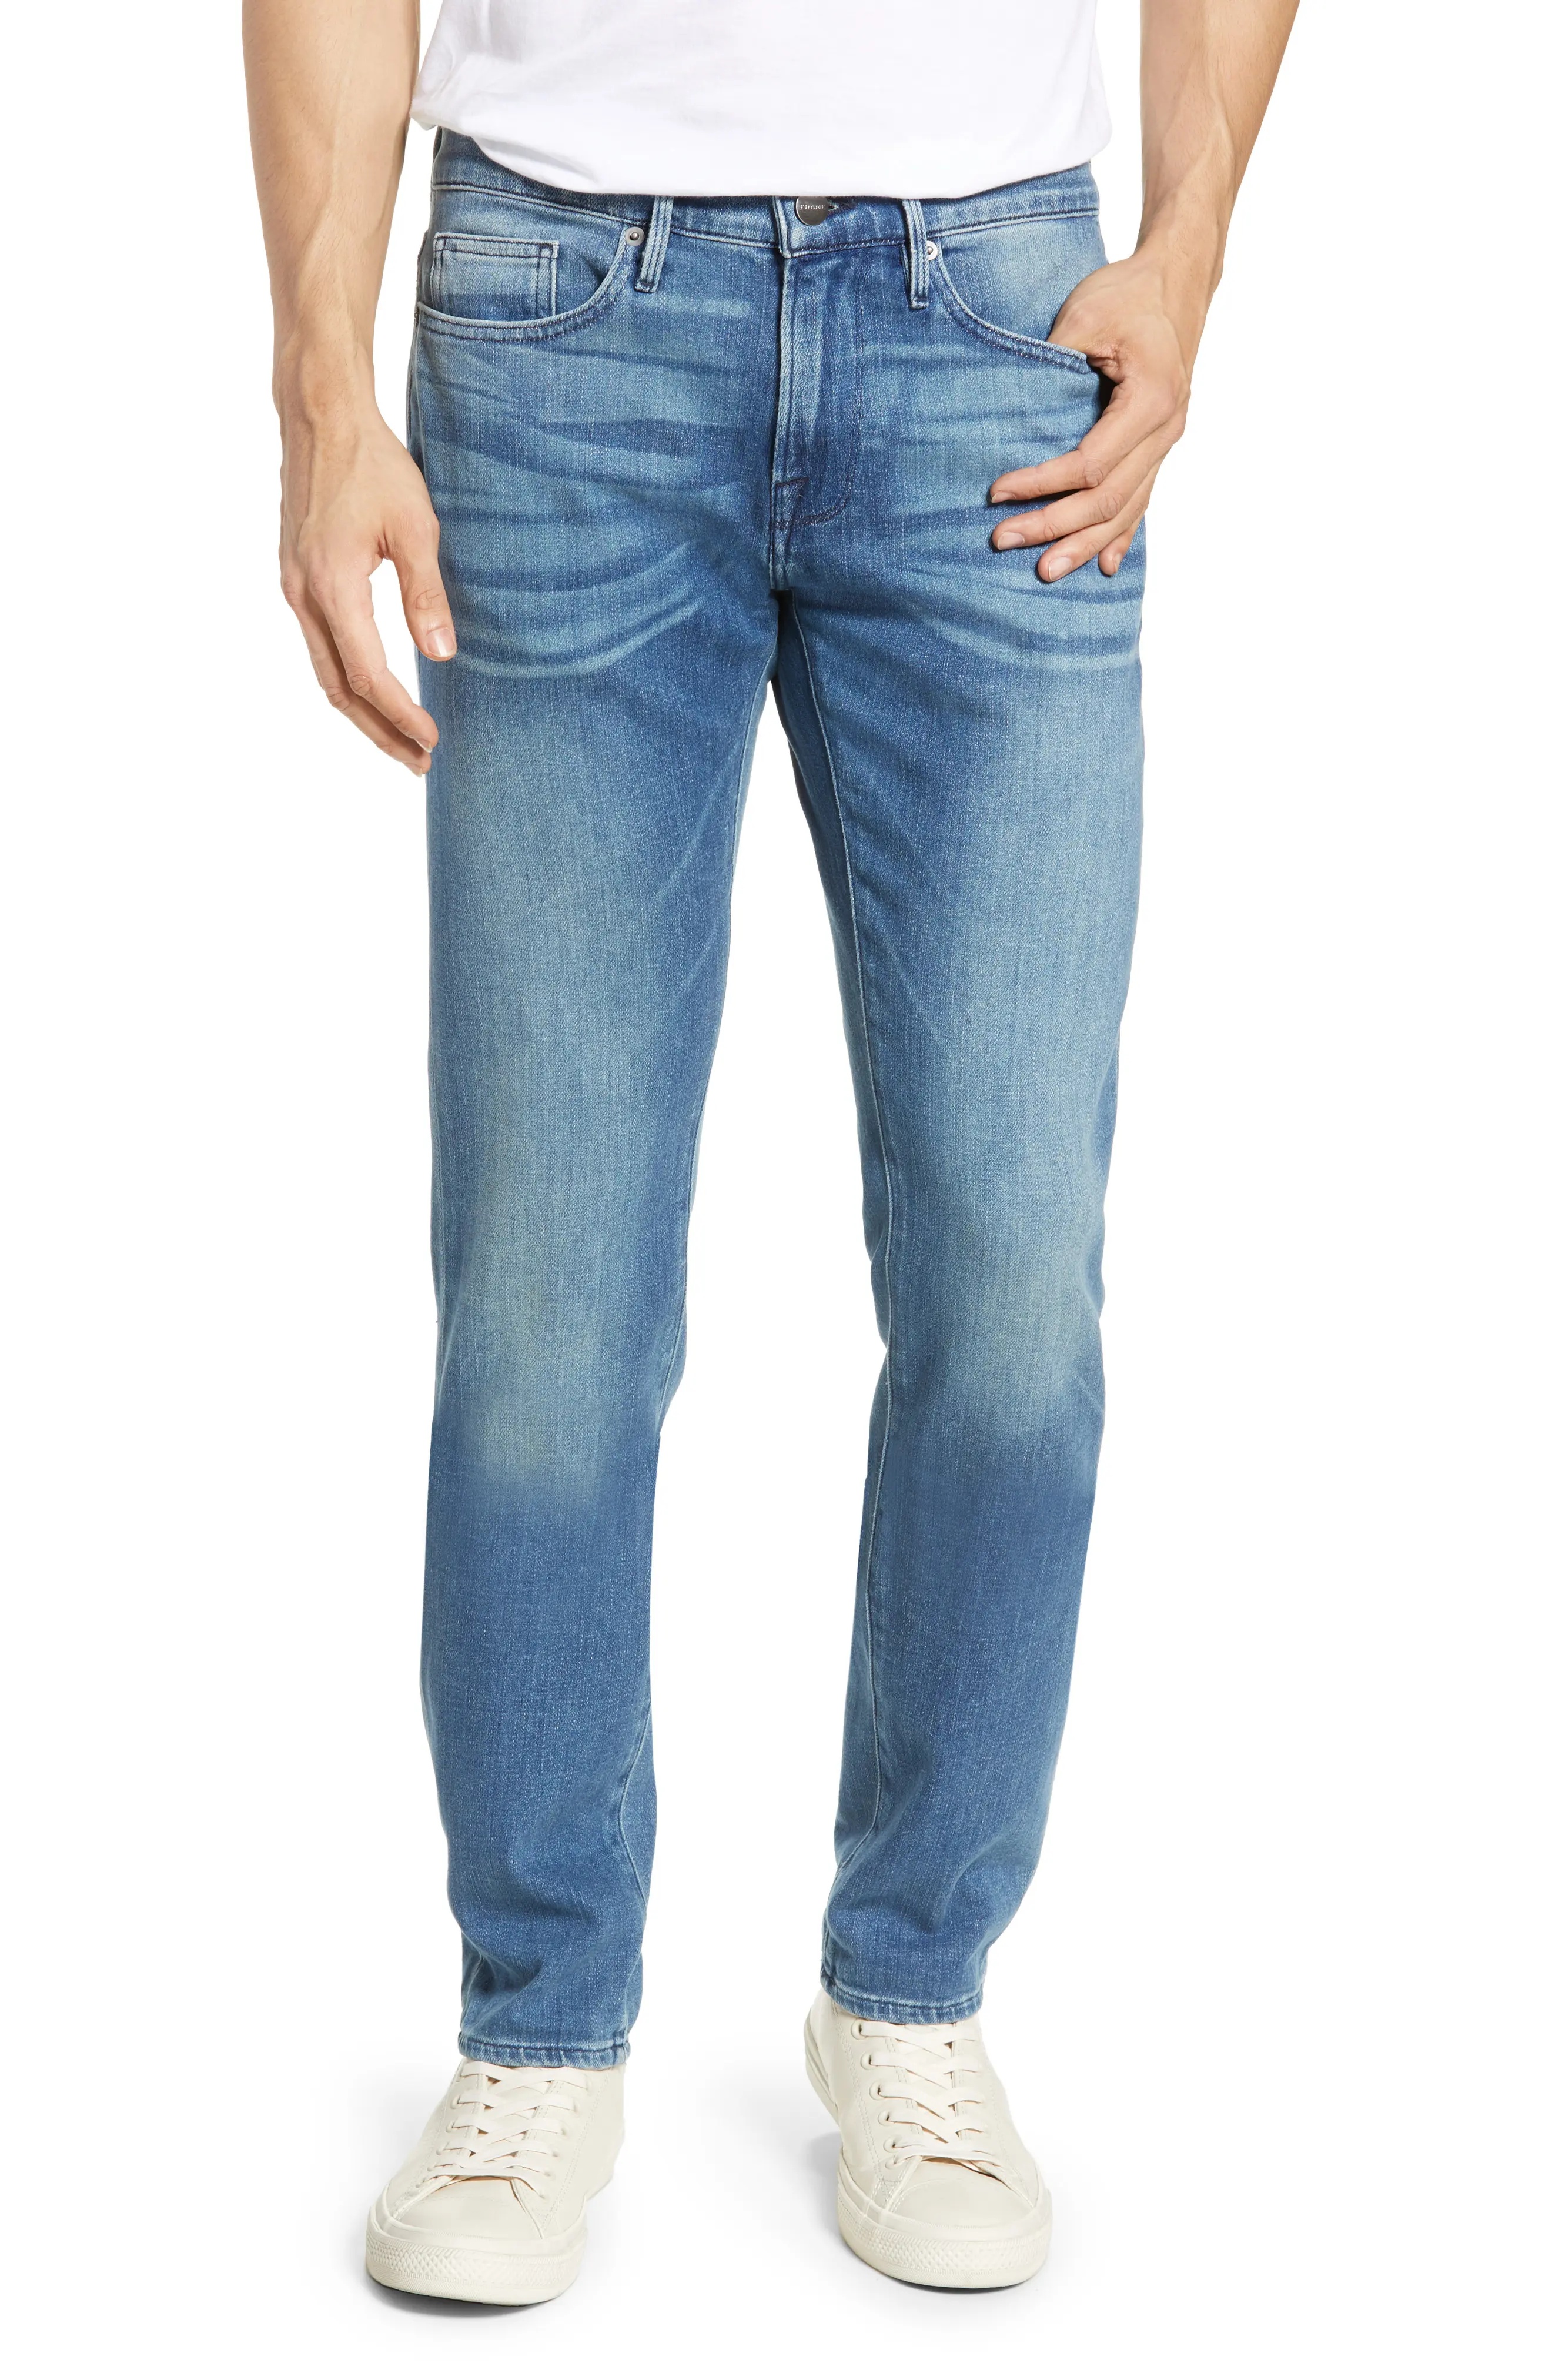 L'Homme Skinny Fit Jeans - 1